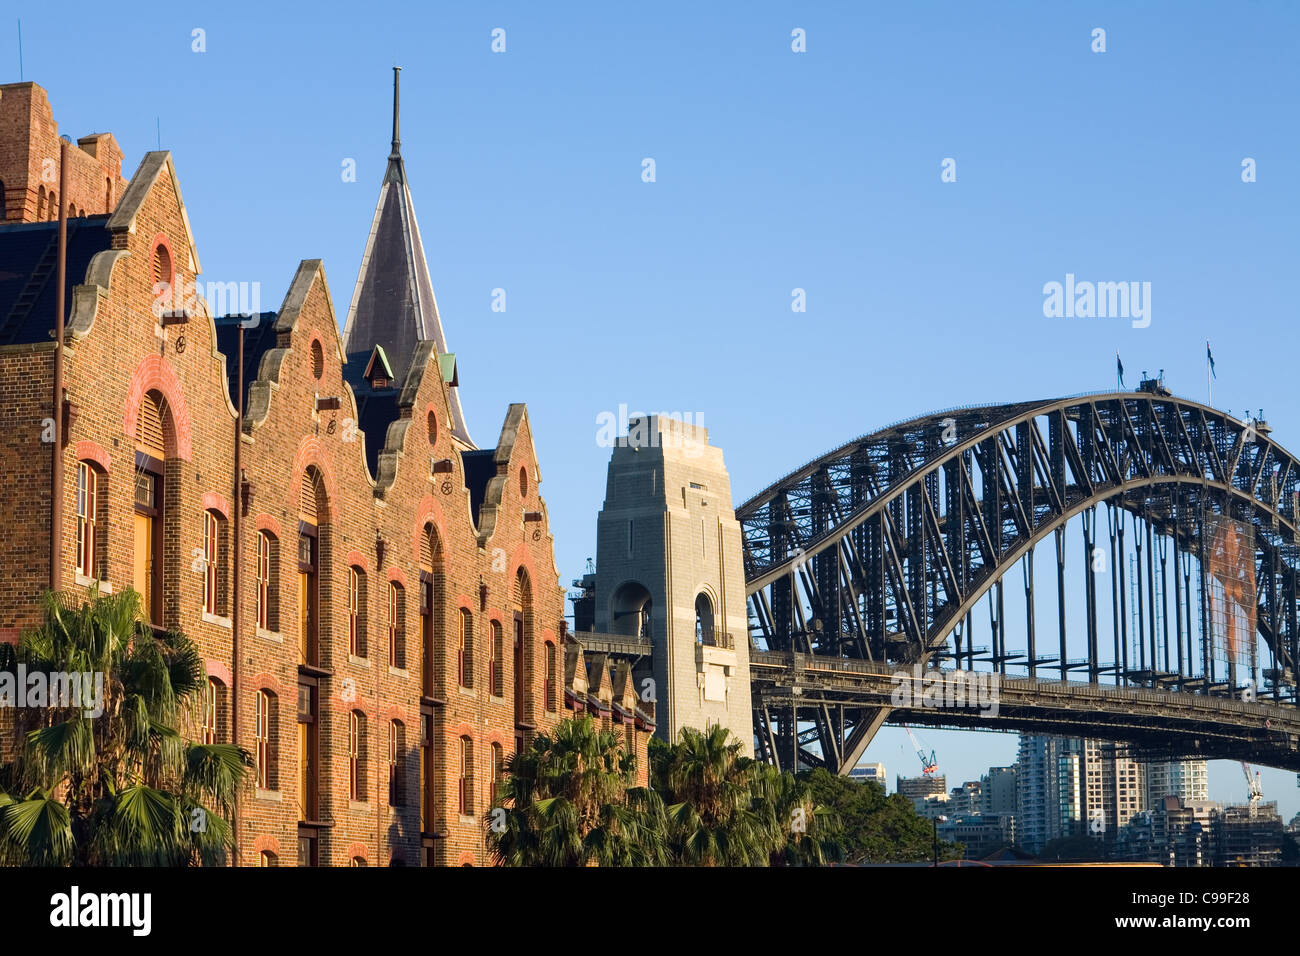 The architecture of the Australasian Steam Navigation Co. building and Harbour Bridge.  Sydney, New South Wales, Australia Stock Photo